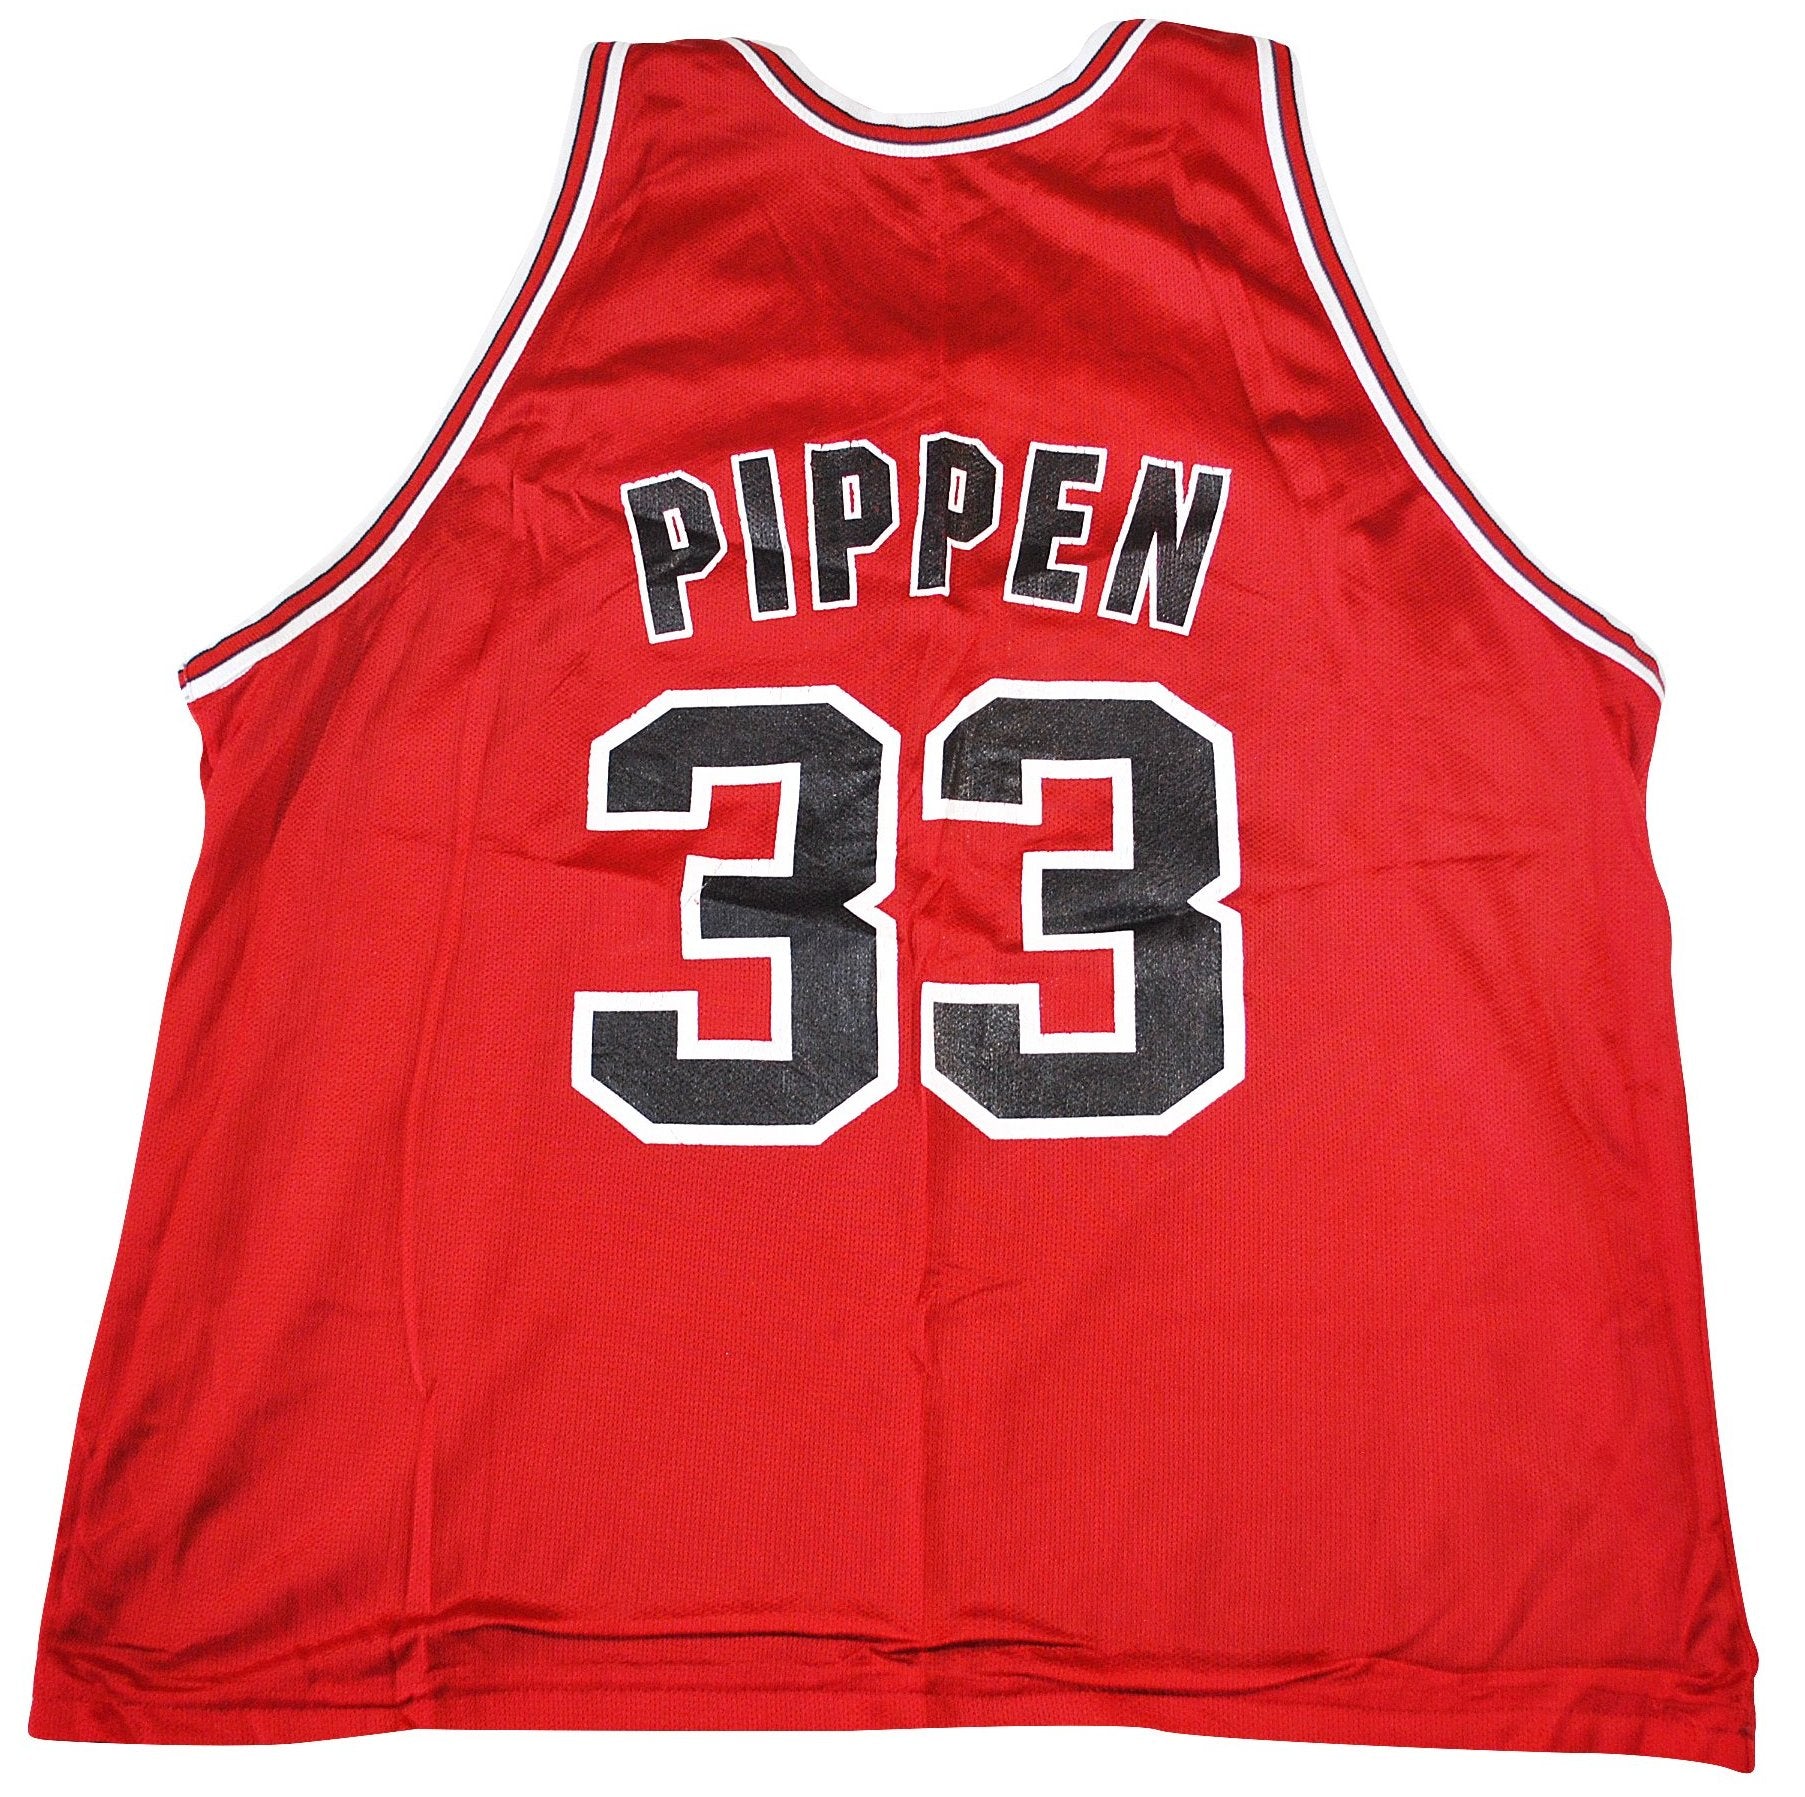 Champion Scottie Pippen Bulls Jersey - The Joint on Pine